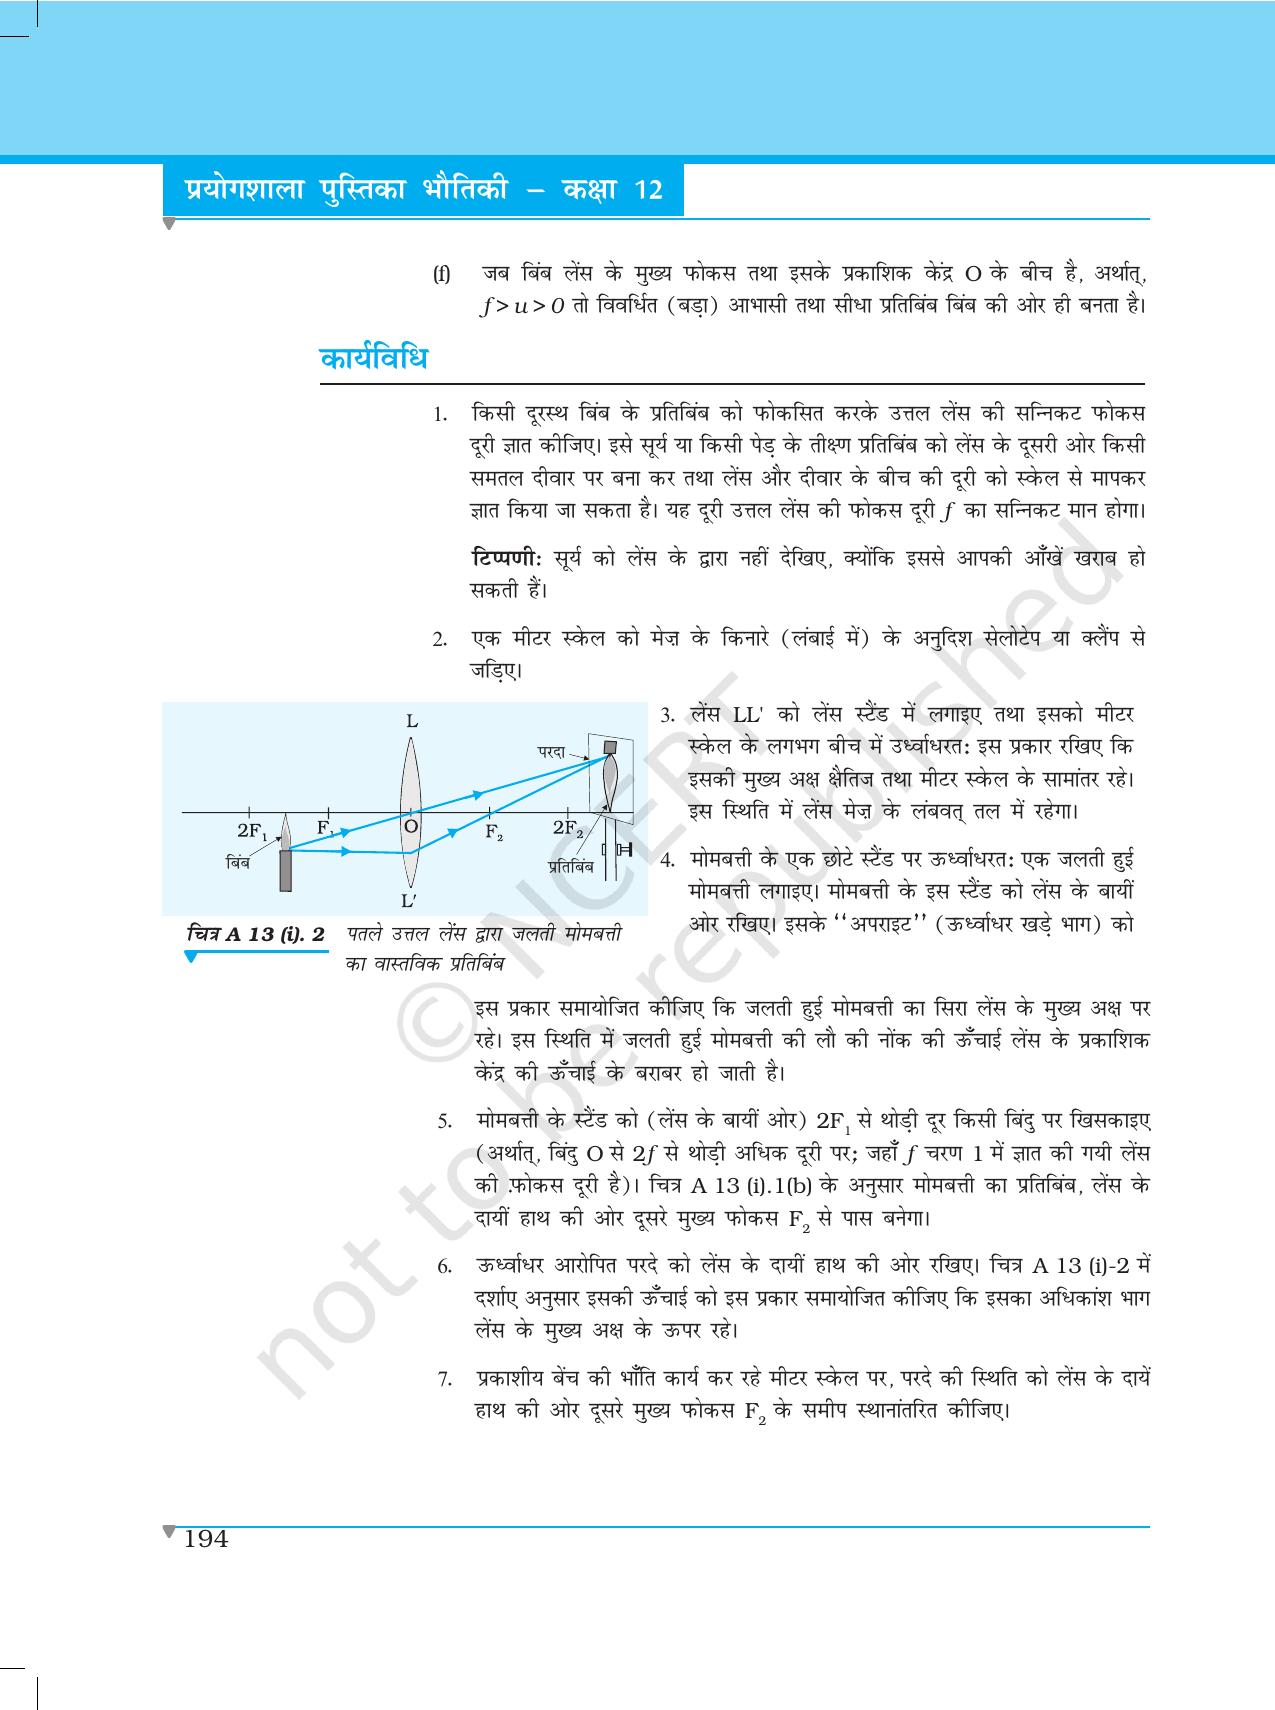 NCERT Laboratory Manuals for Class XII भौतिकी - क्रियाकलाप (12 - 14) - Page 5